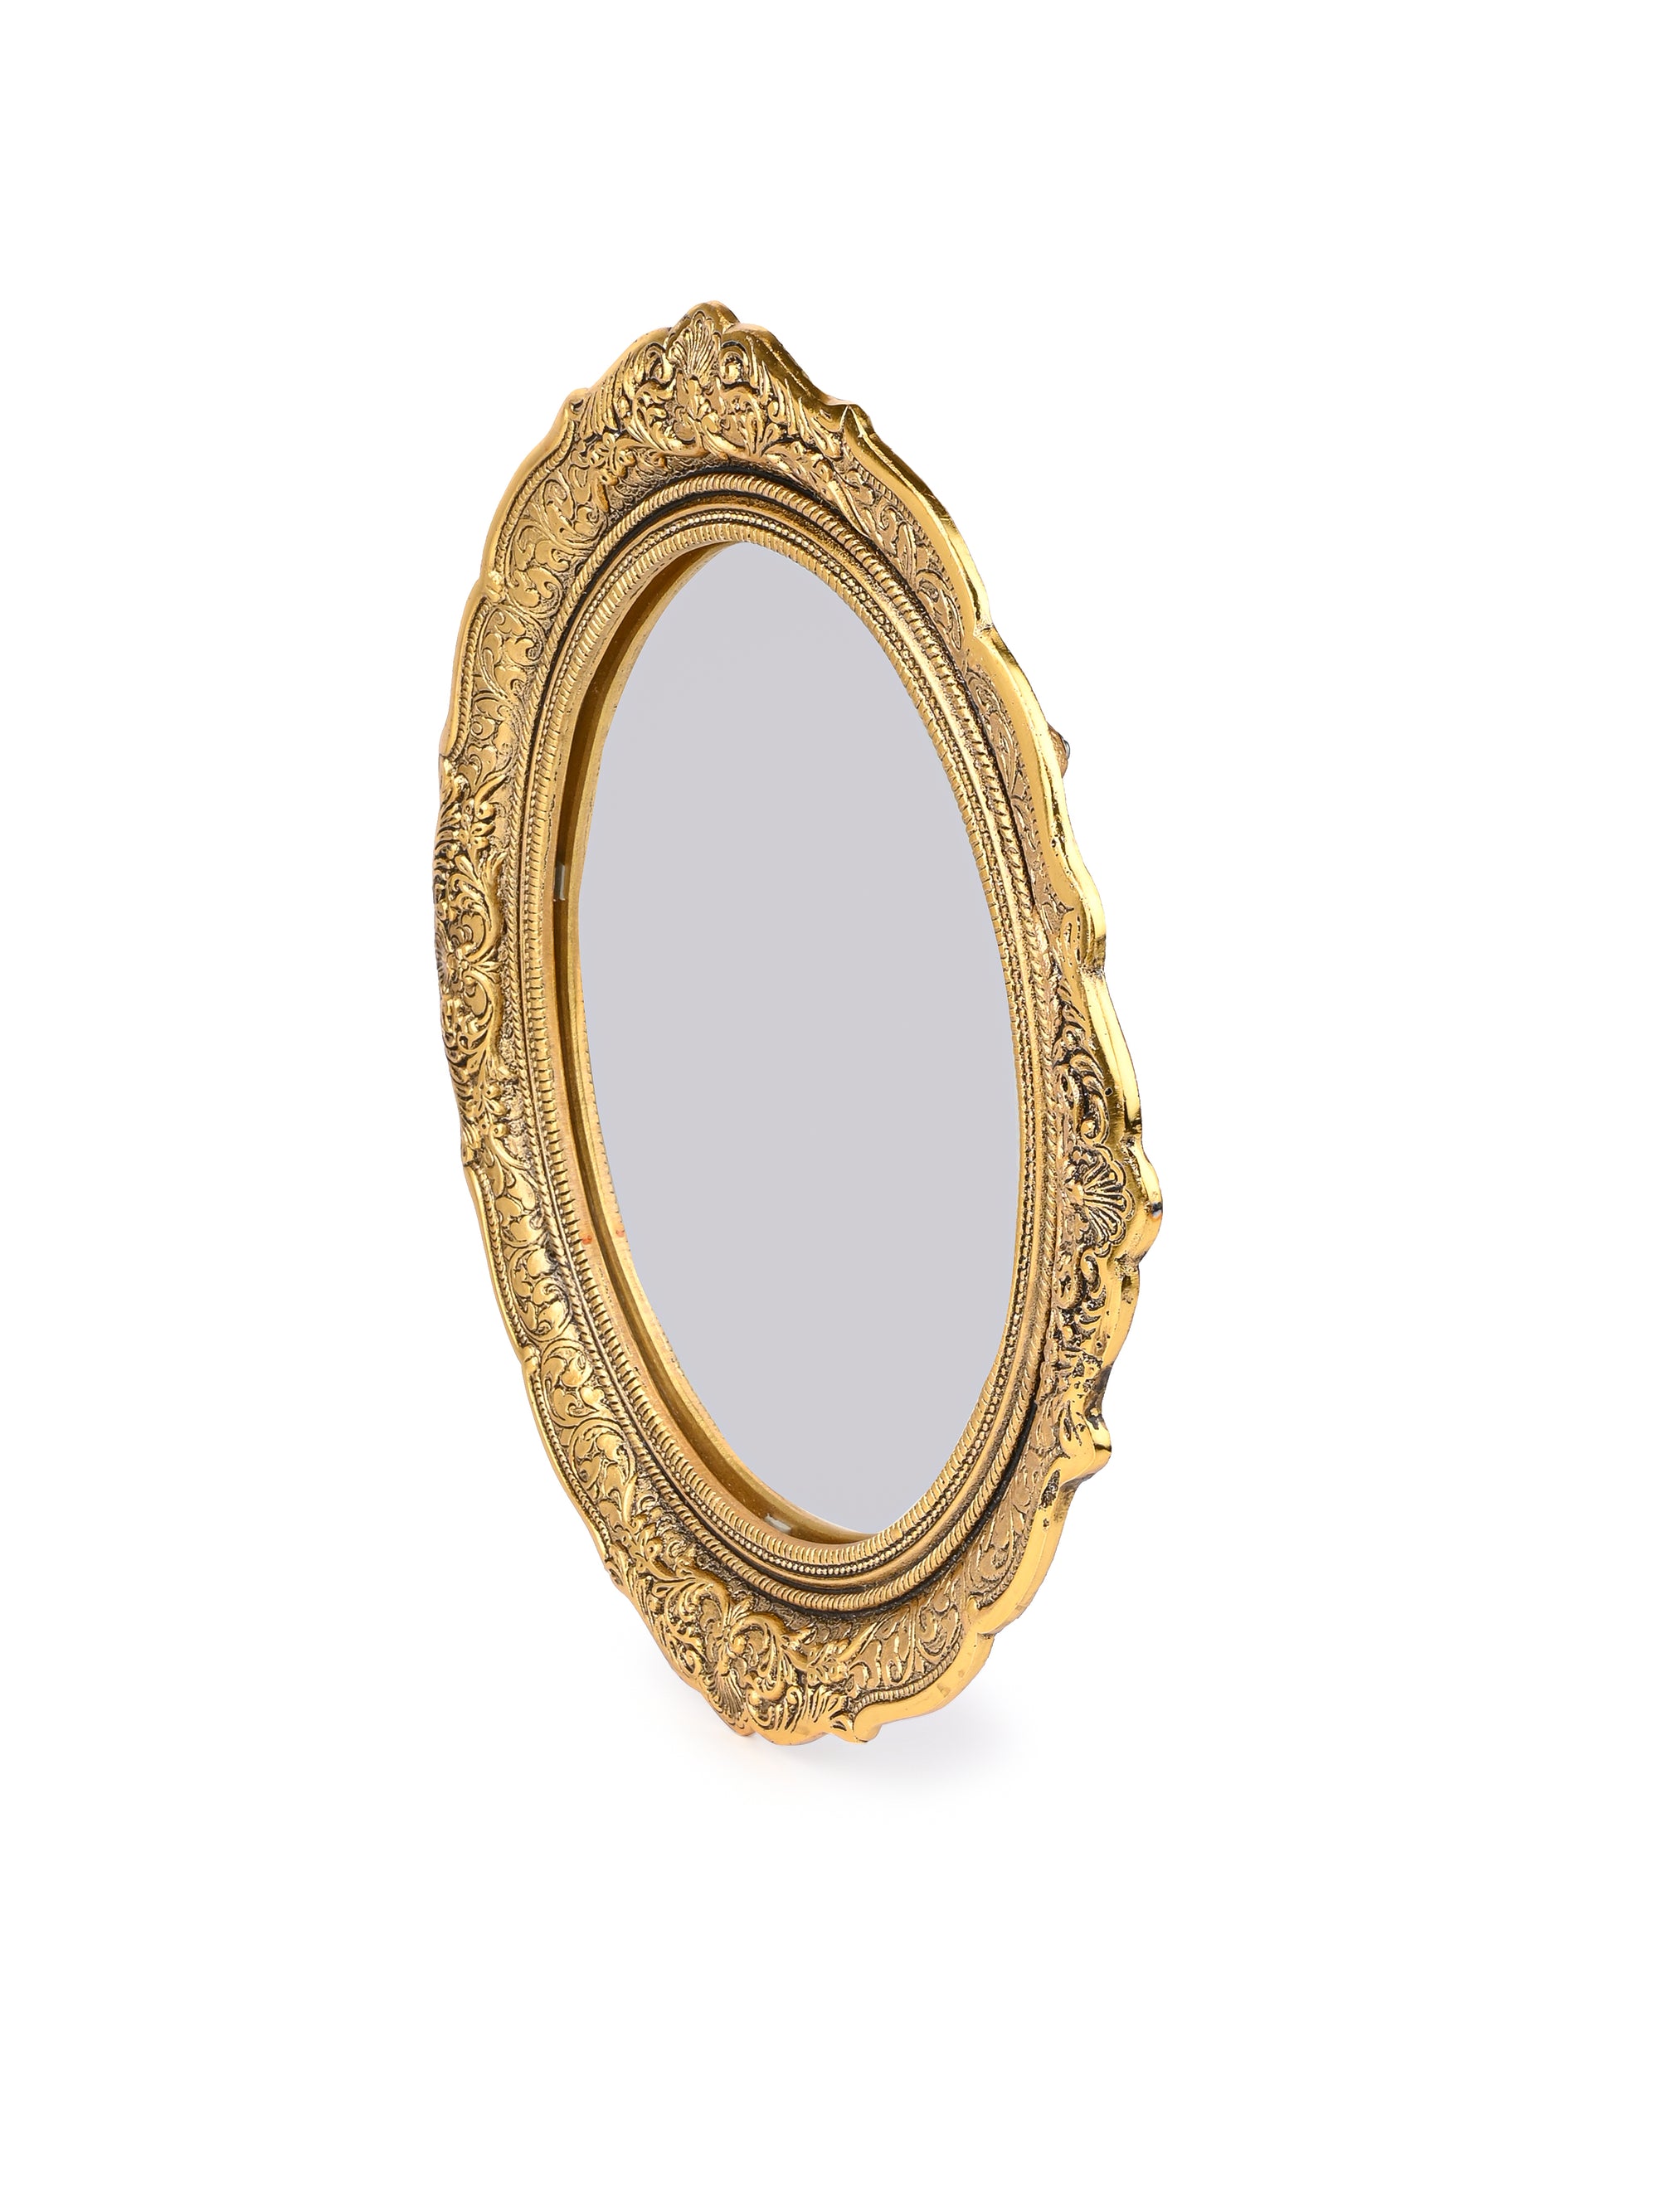 Hand Crafted Antique Gold Oval Wall Mirror - 15 inches